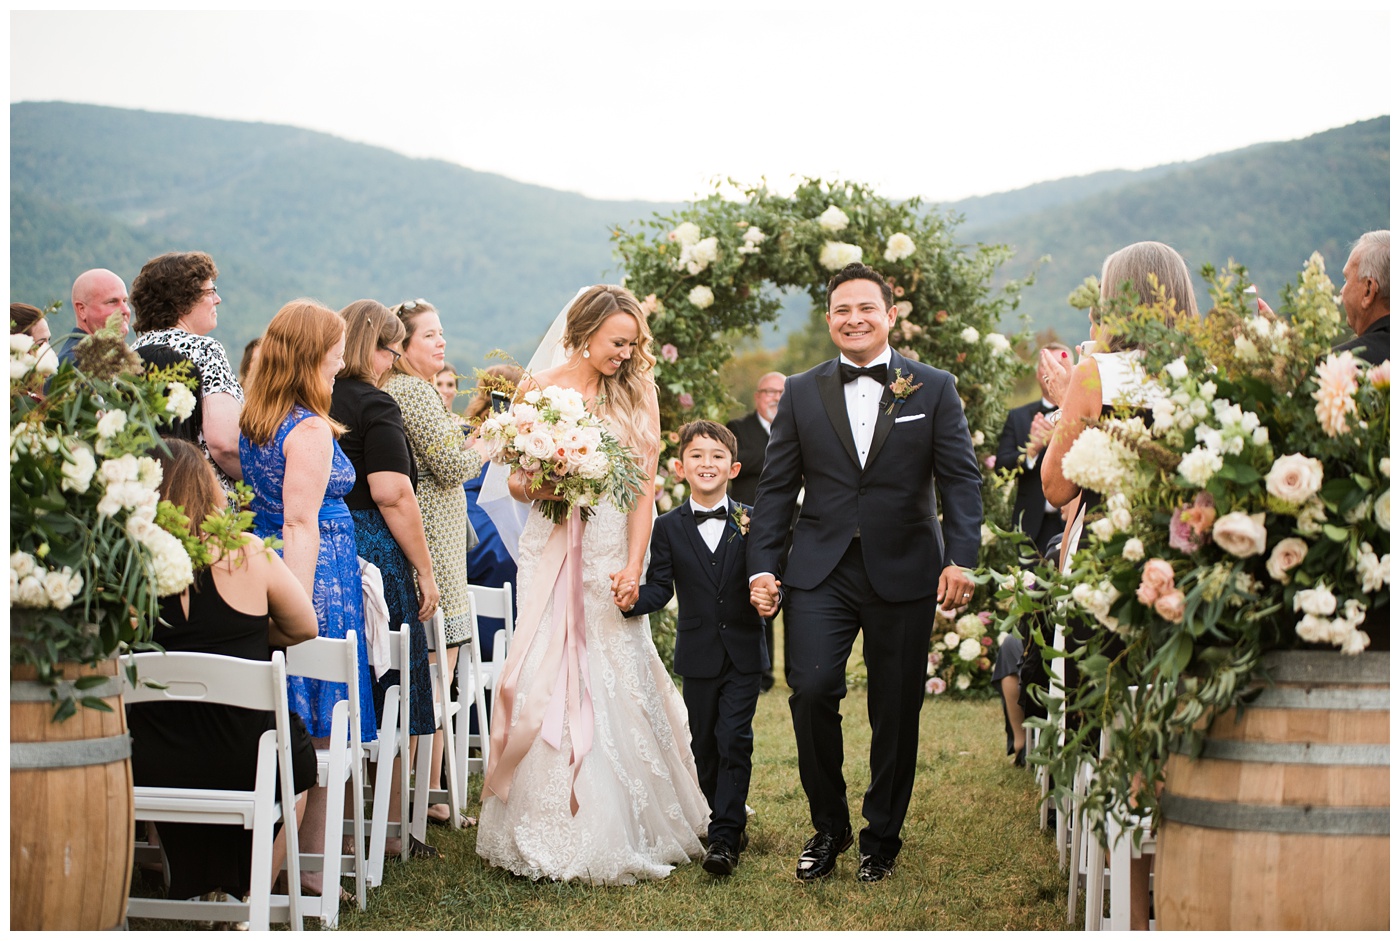 Bride and groom ceremony at King Family Vineyard in Charlottesville VA